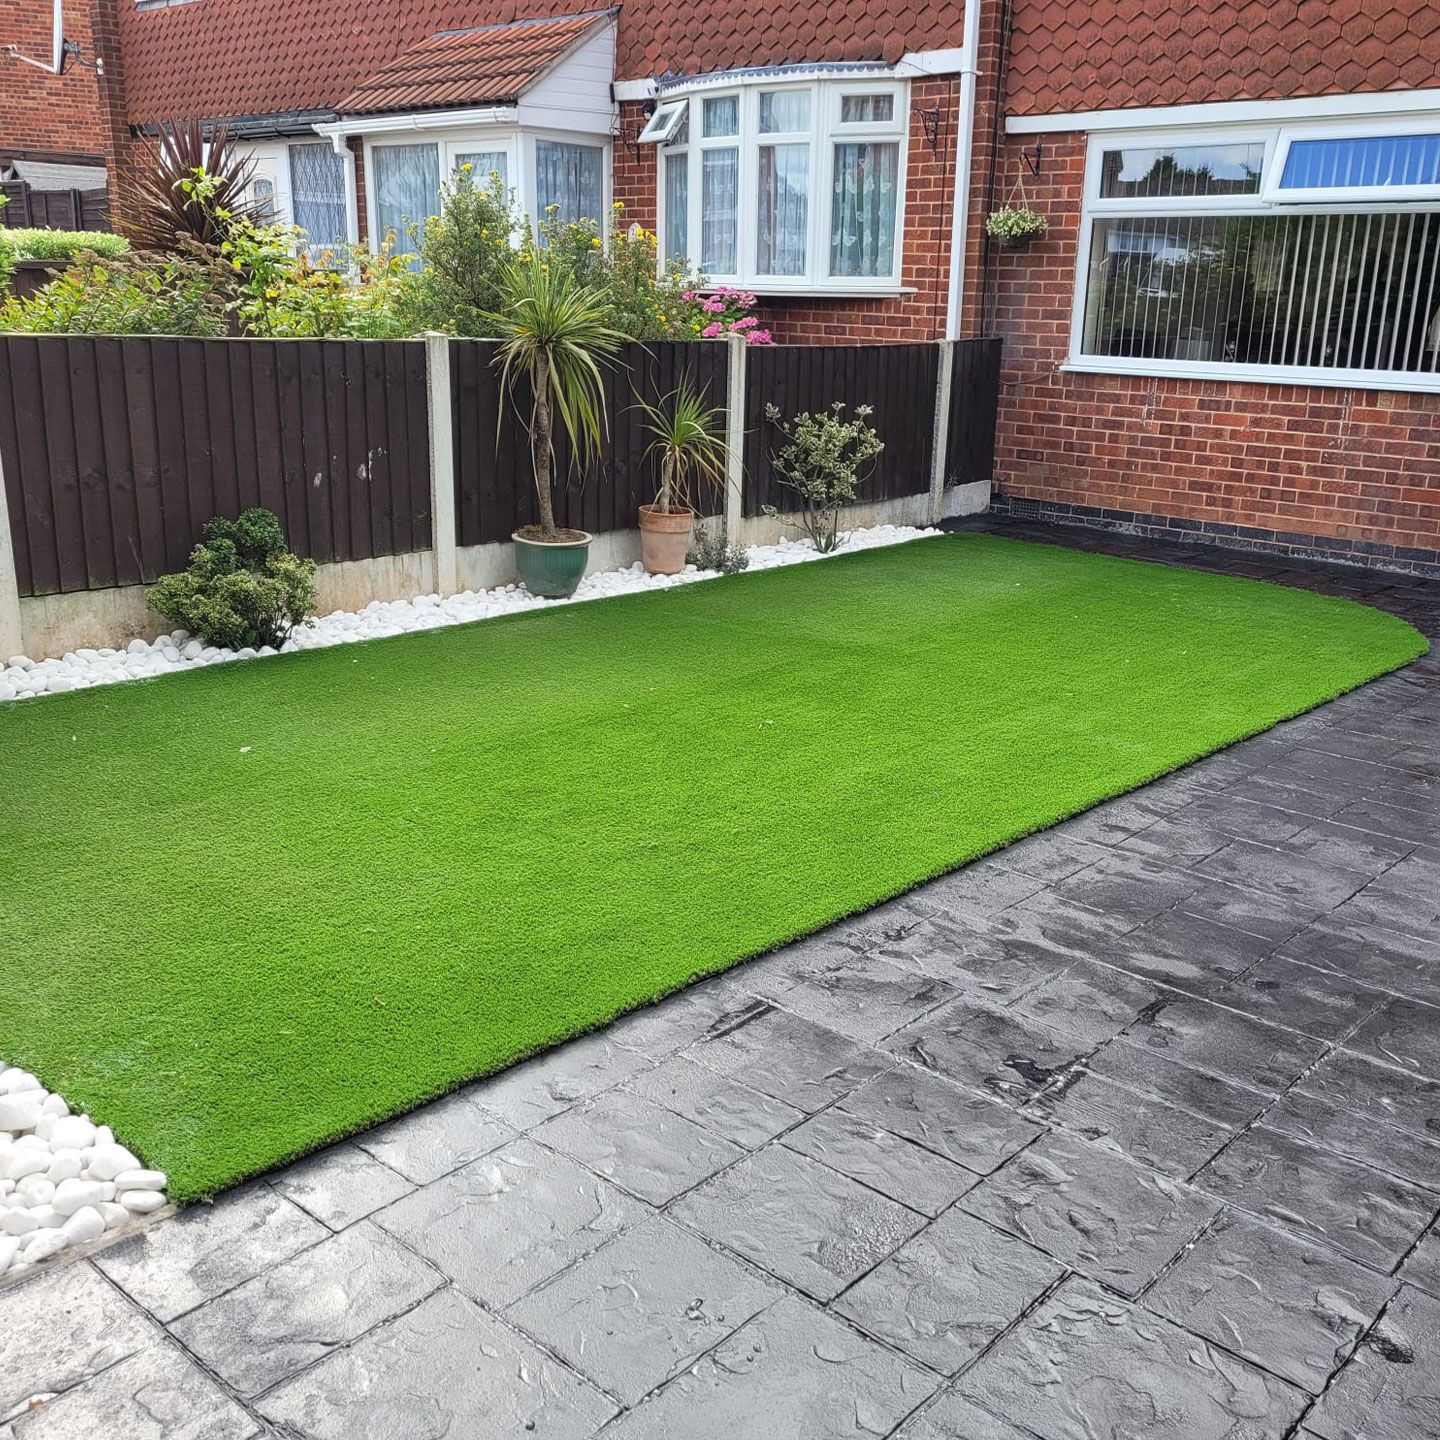 Kenilworth landscaping showing new artificial grass and patterned concrete paving